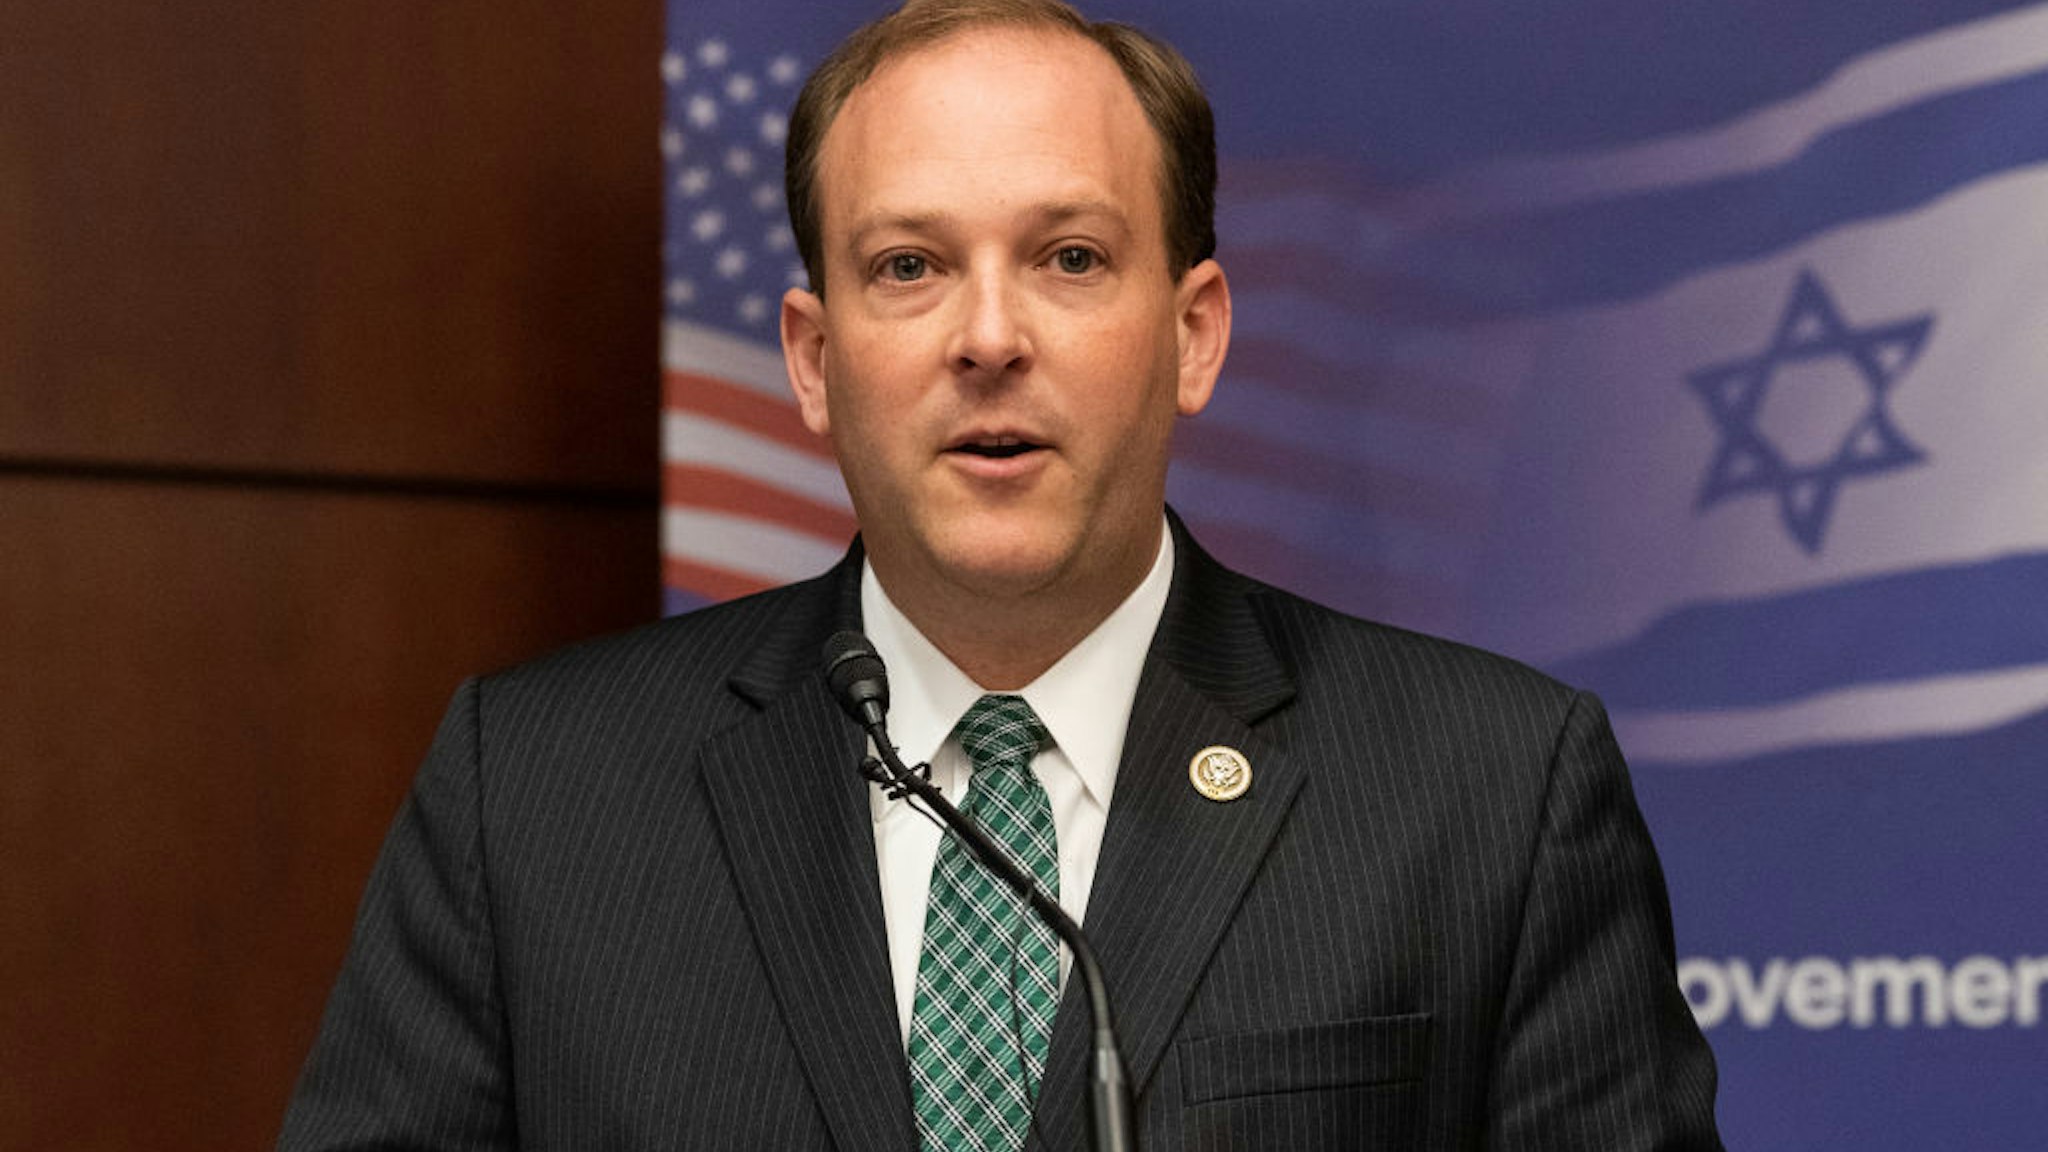 Lee Zeldin (R-NY) at the American Zionist Movement / AZM Washington Forum